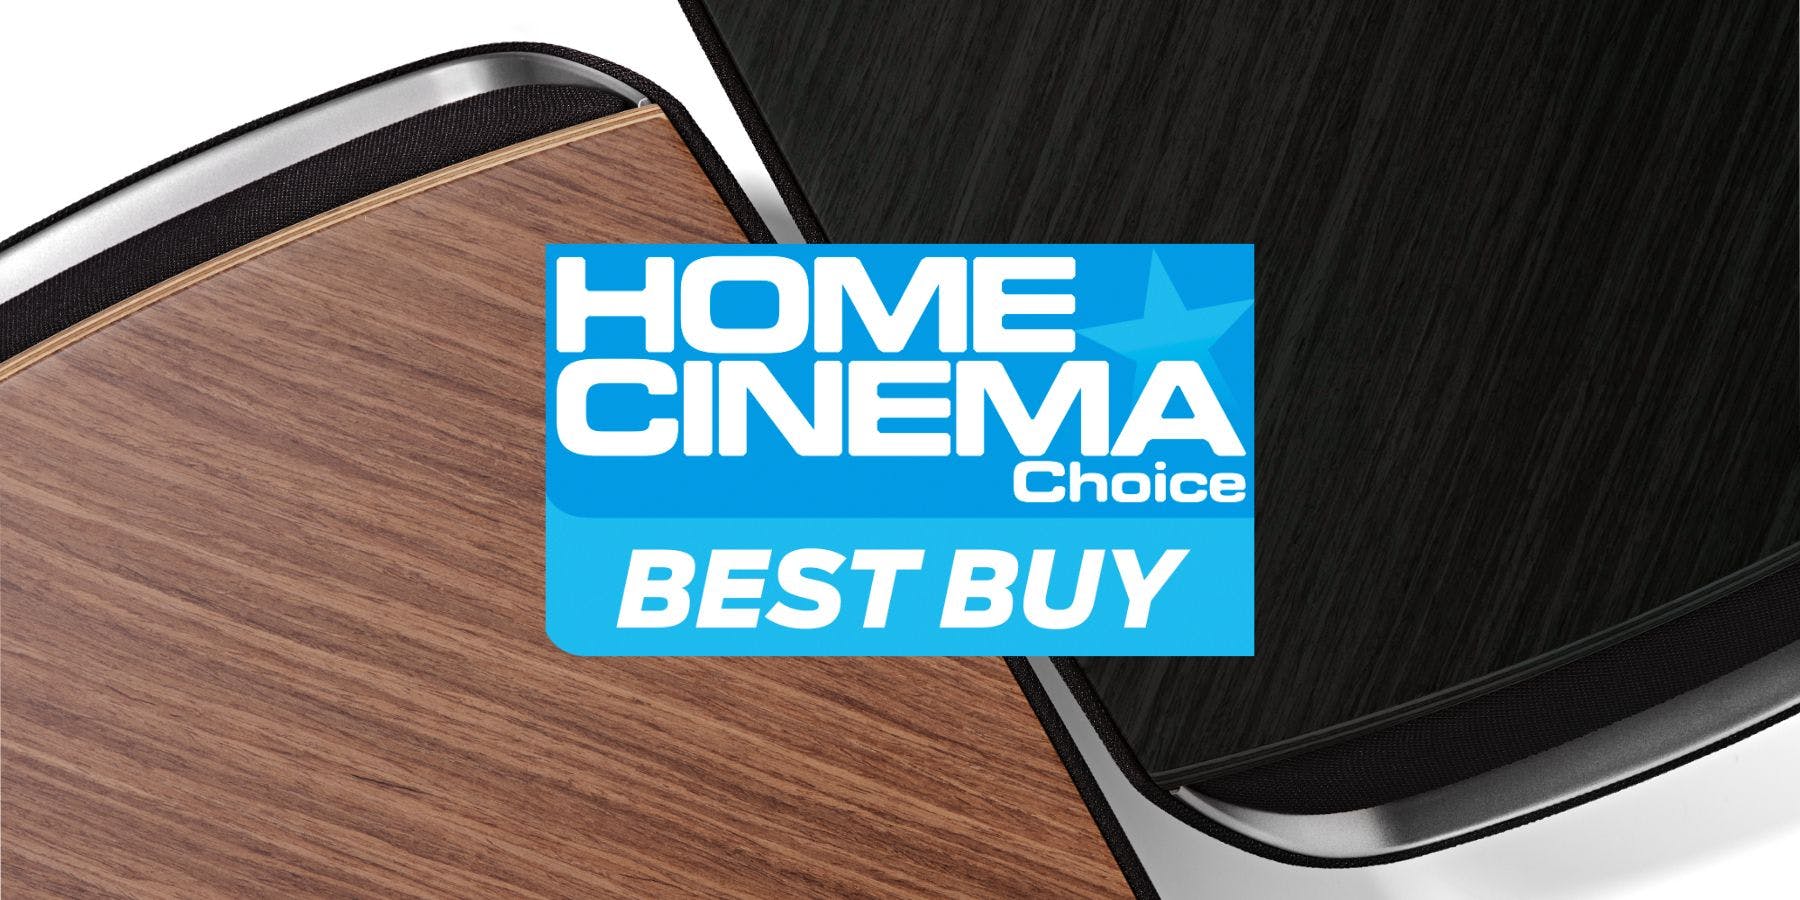 Omnia awarded 'Best Buy' from Home Cinema Choice